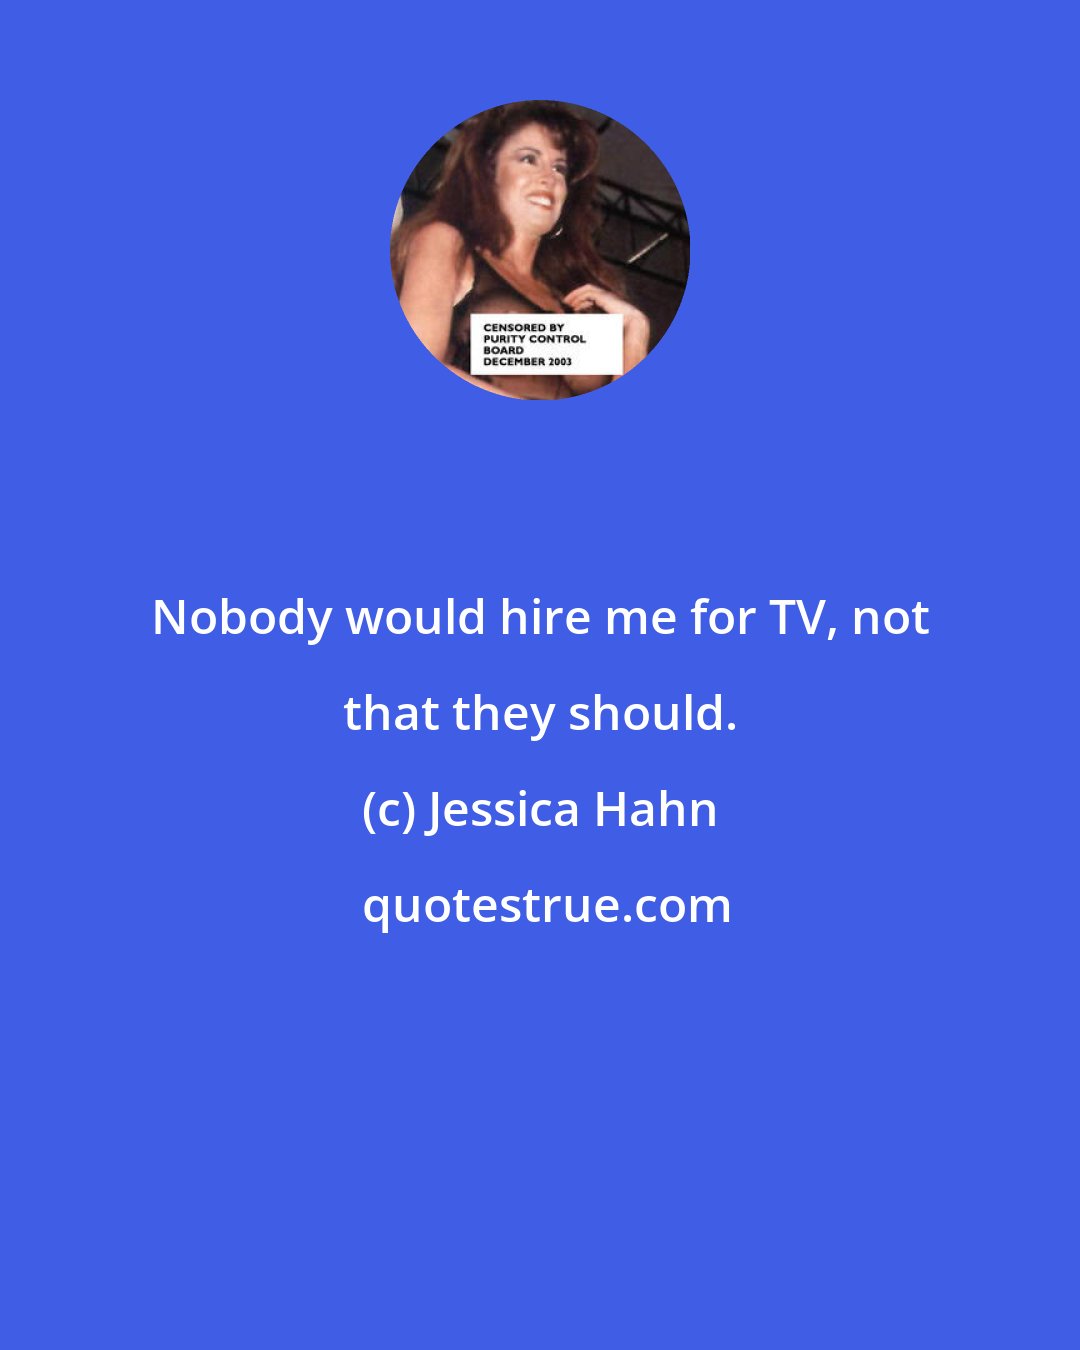 Jessica Hahn: Nobody would hire me for TV, not that they should.